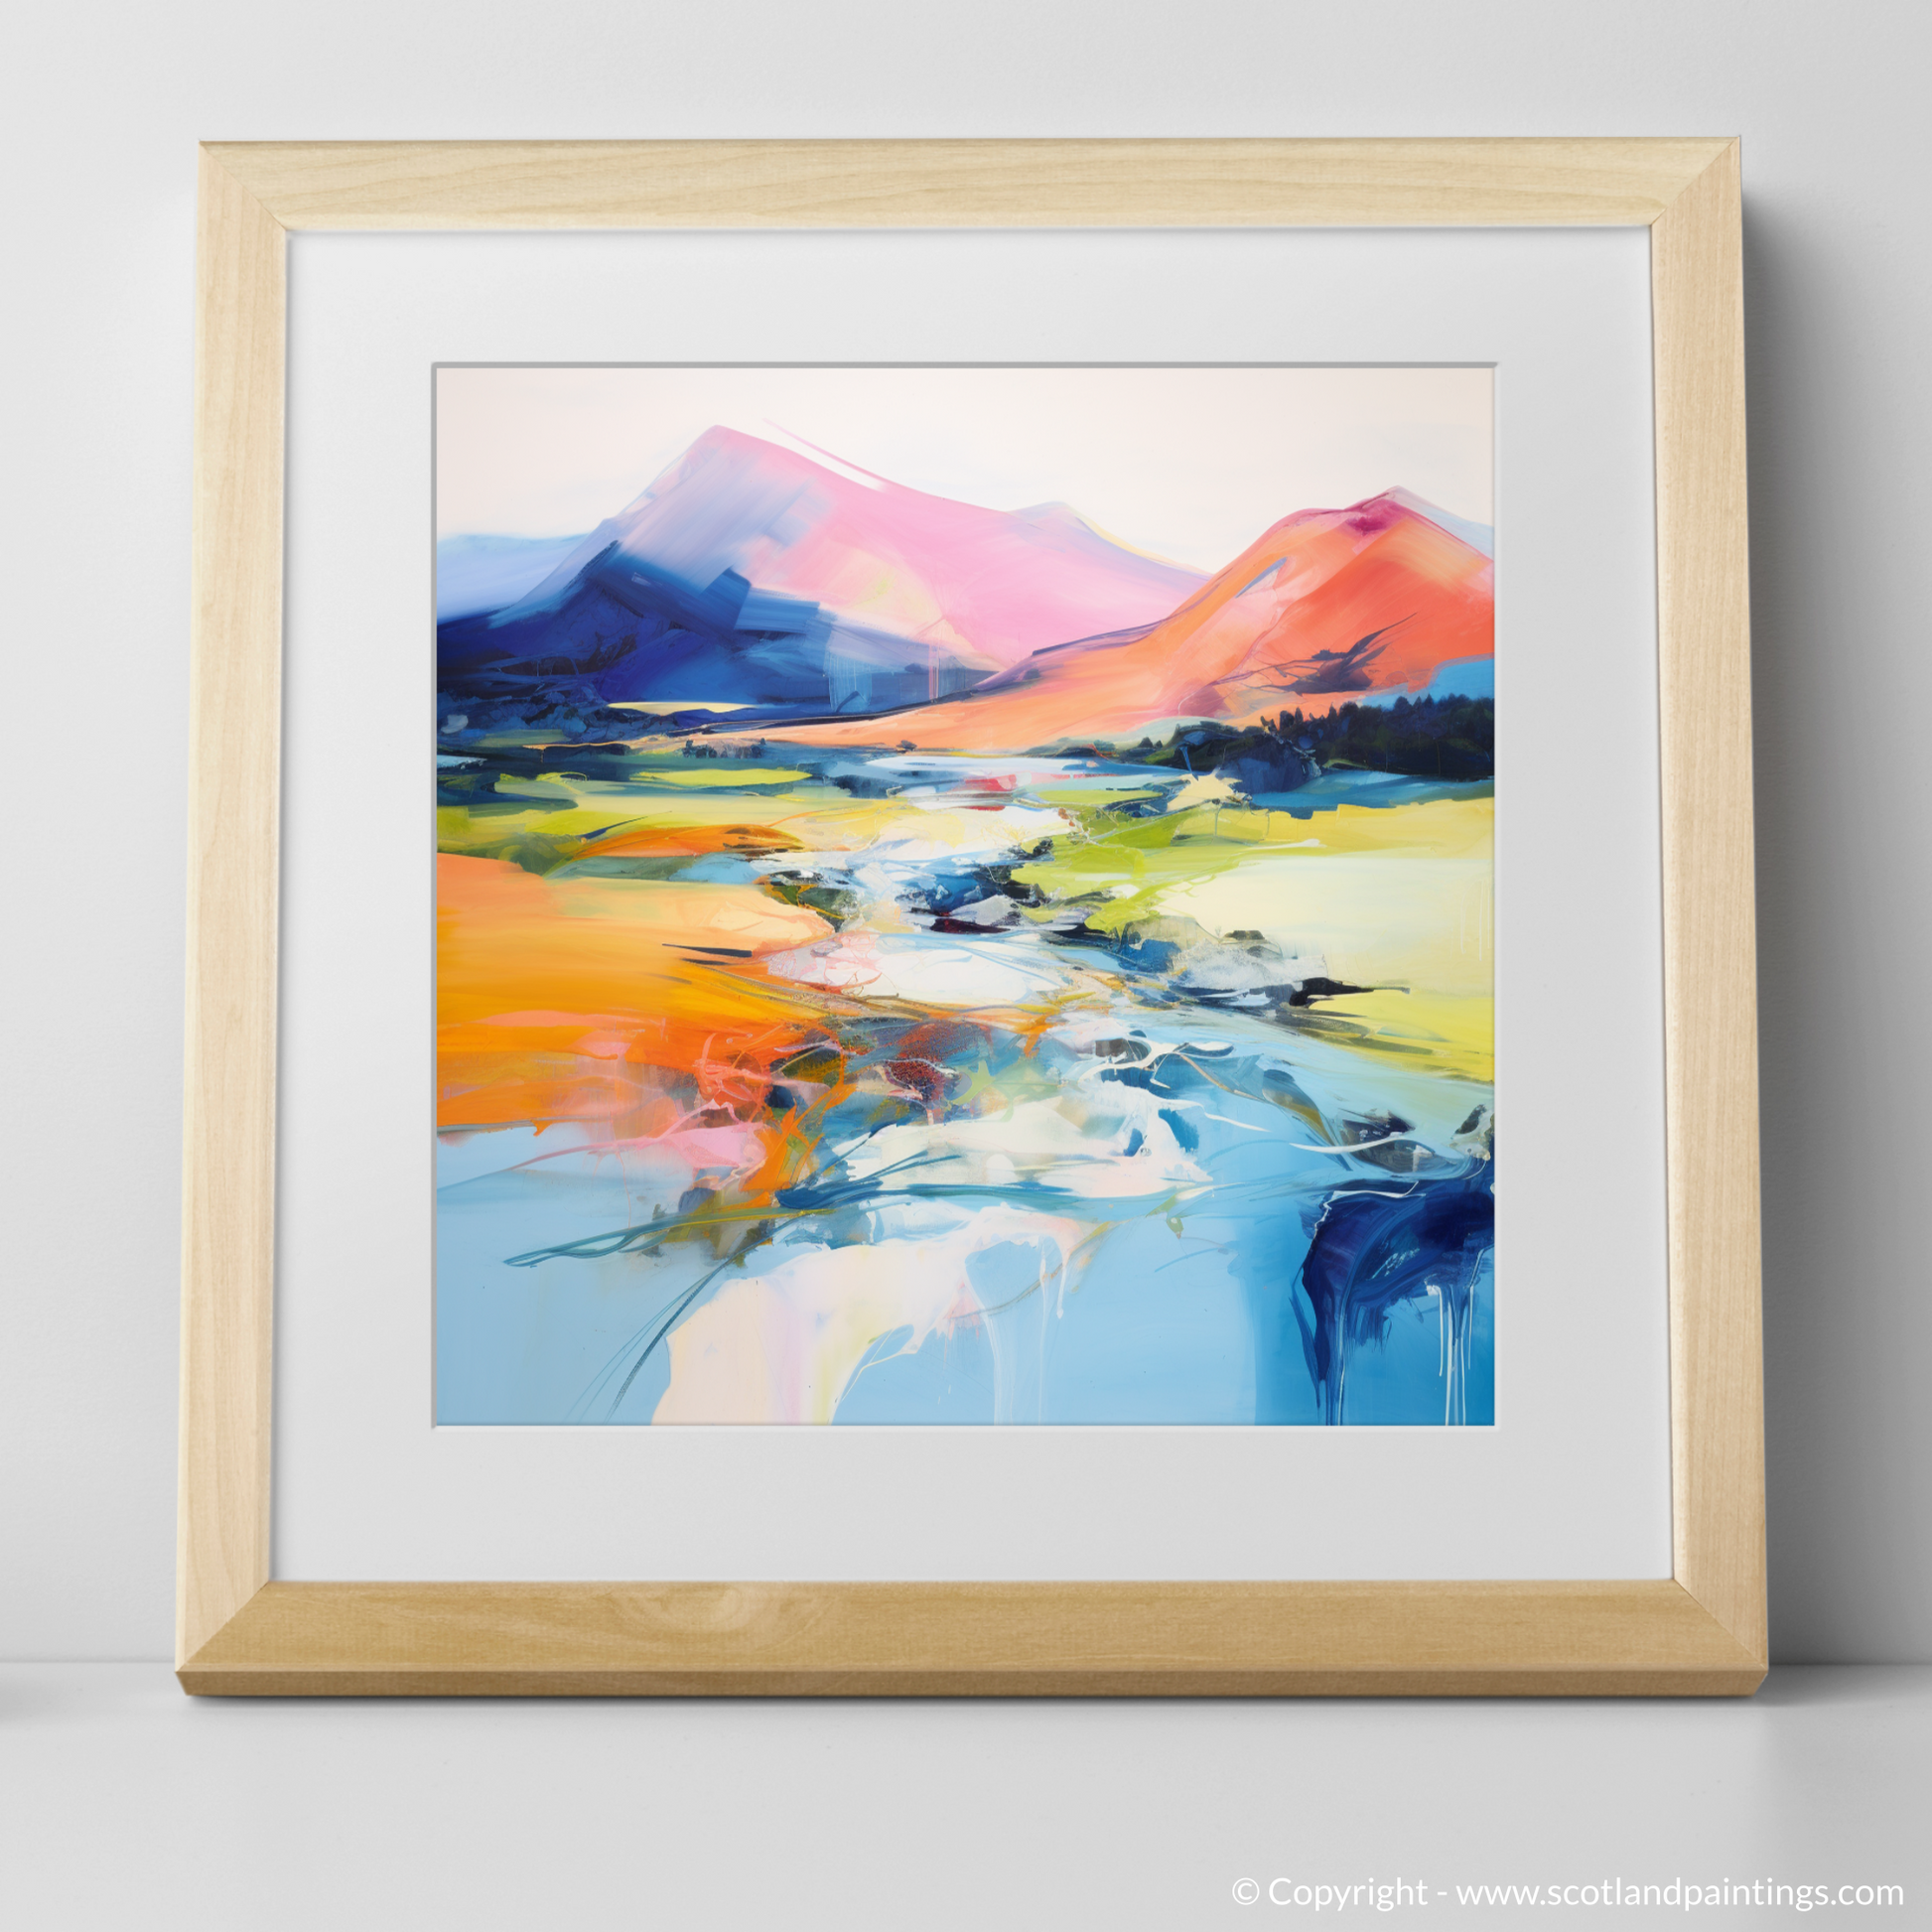 Art Print of River Spean, Highlands in summer with a natural frame